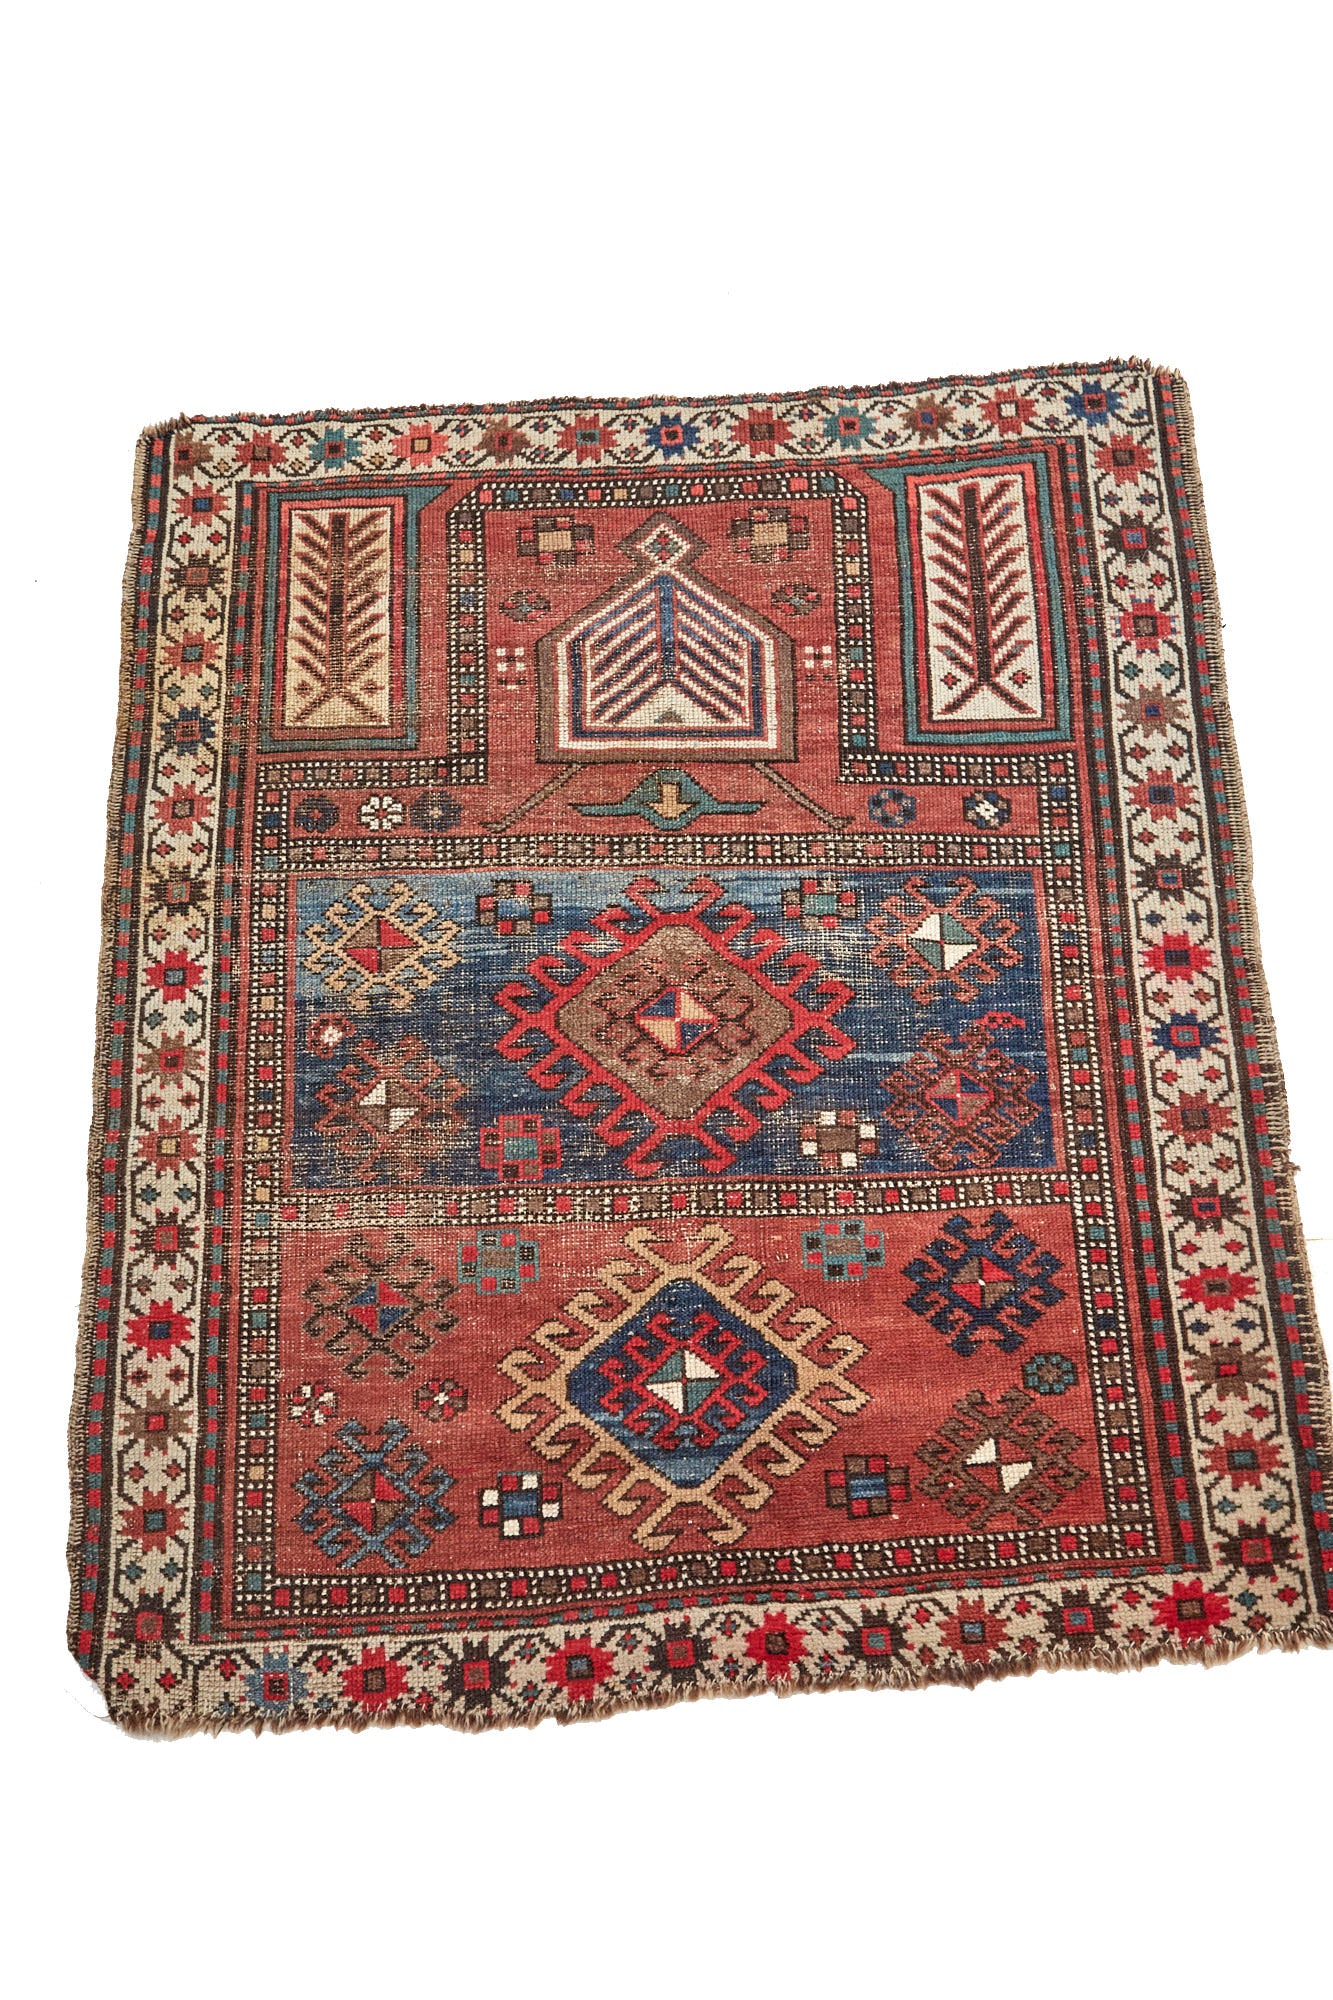 hand woven pink, blue and white antique Persian prayer rug - Available from King Kennedy Rugs Los Angeles